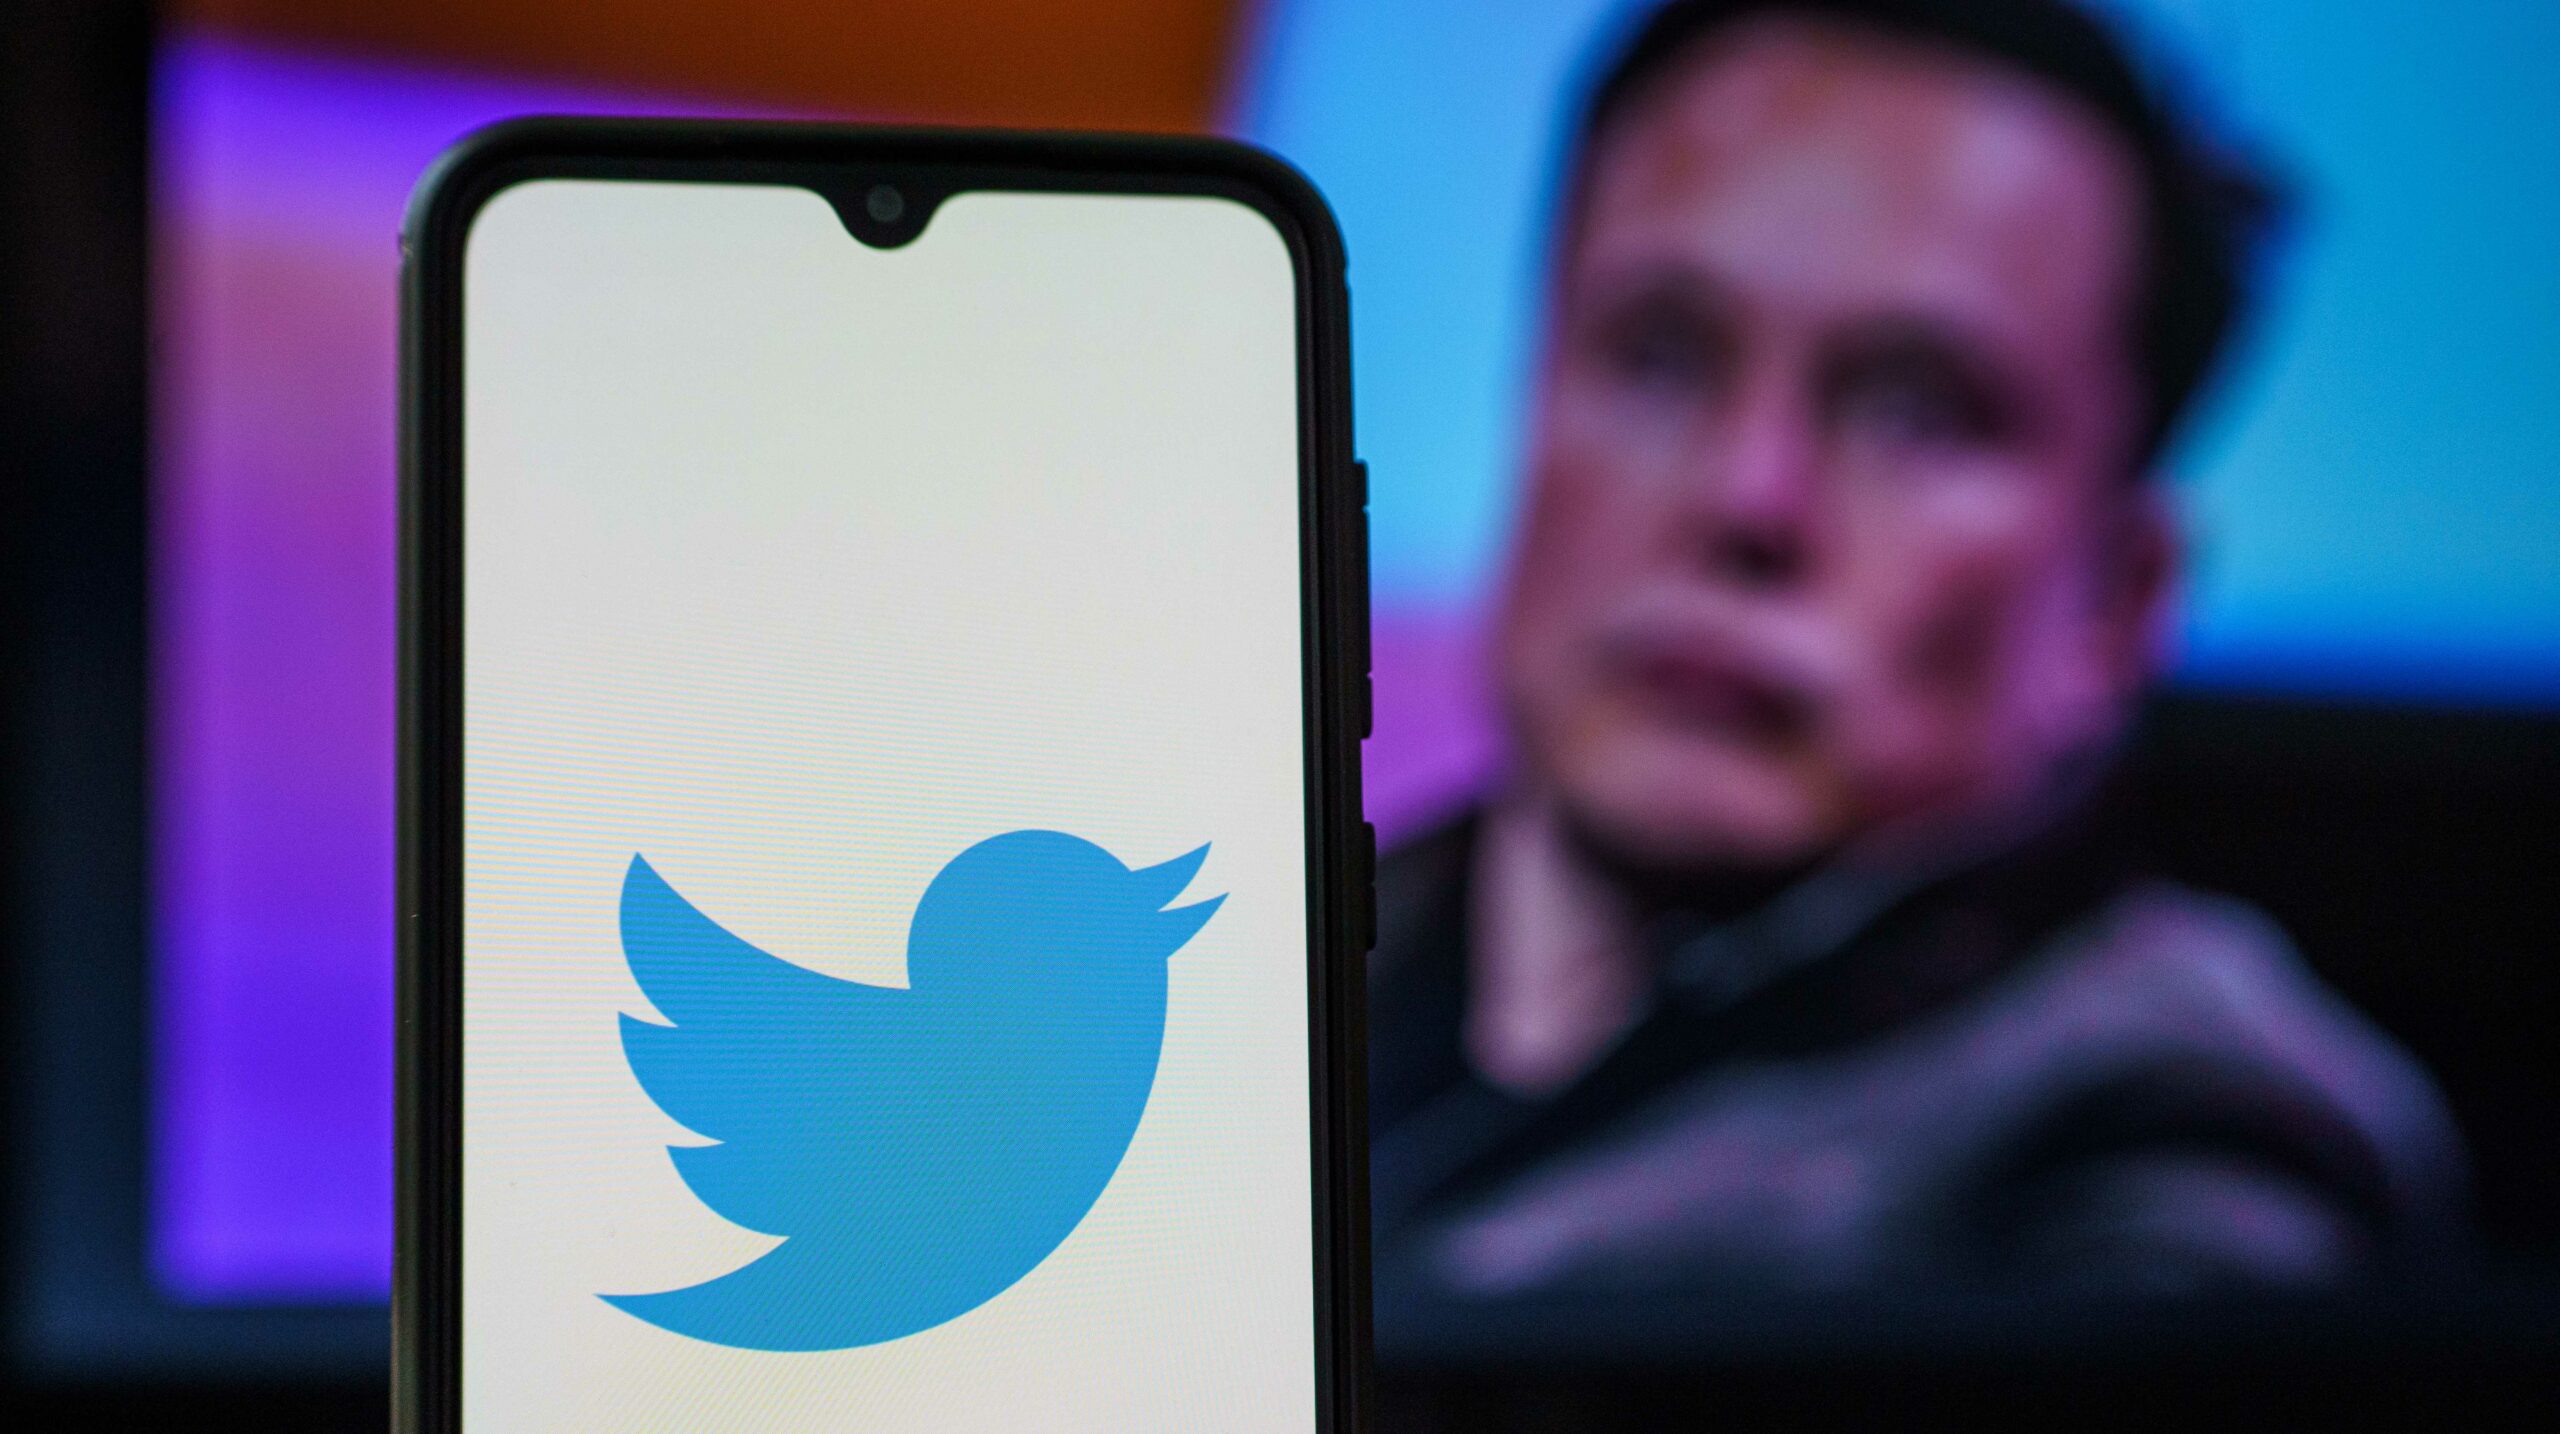 Judge says Musk, Twitter trial will take place in October